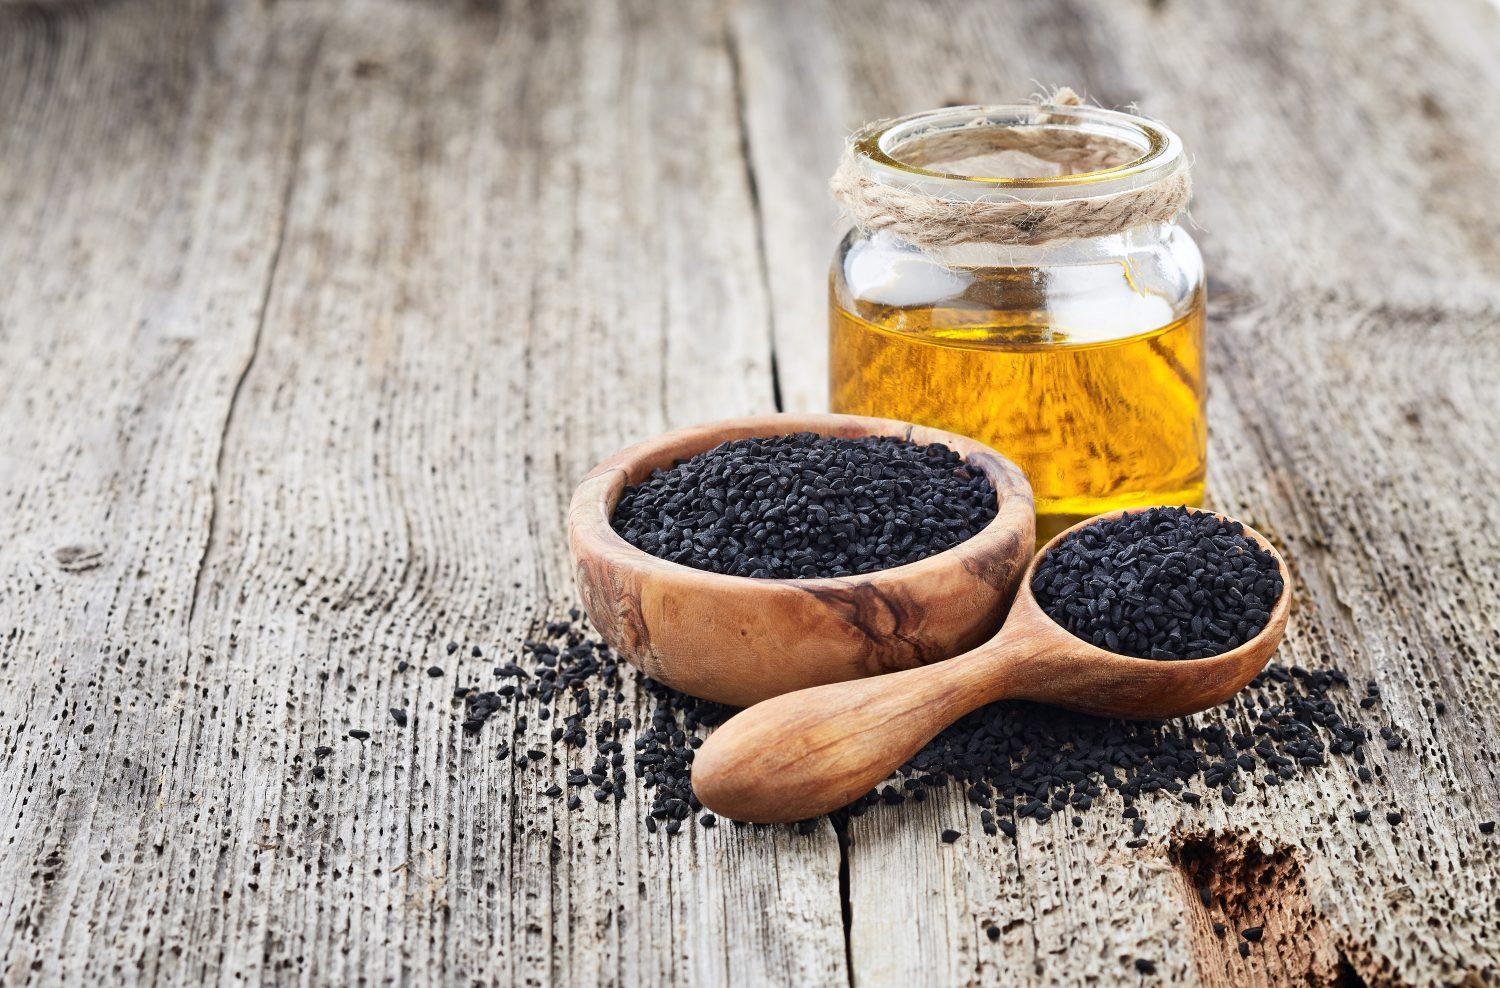 The Miracle Black Seed Oil